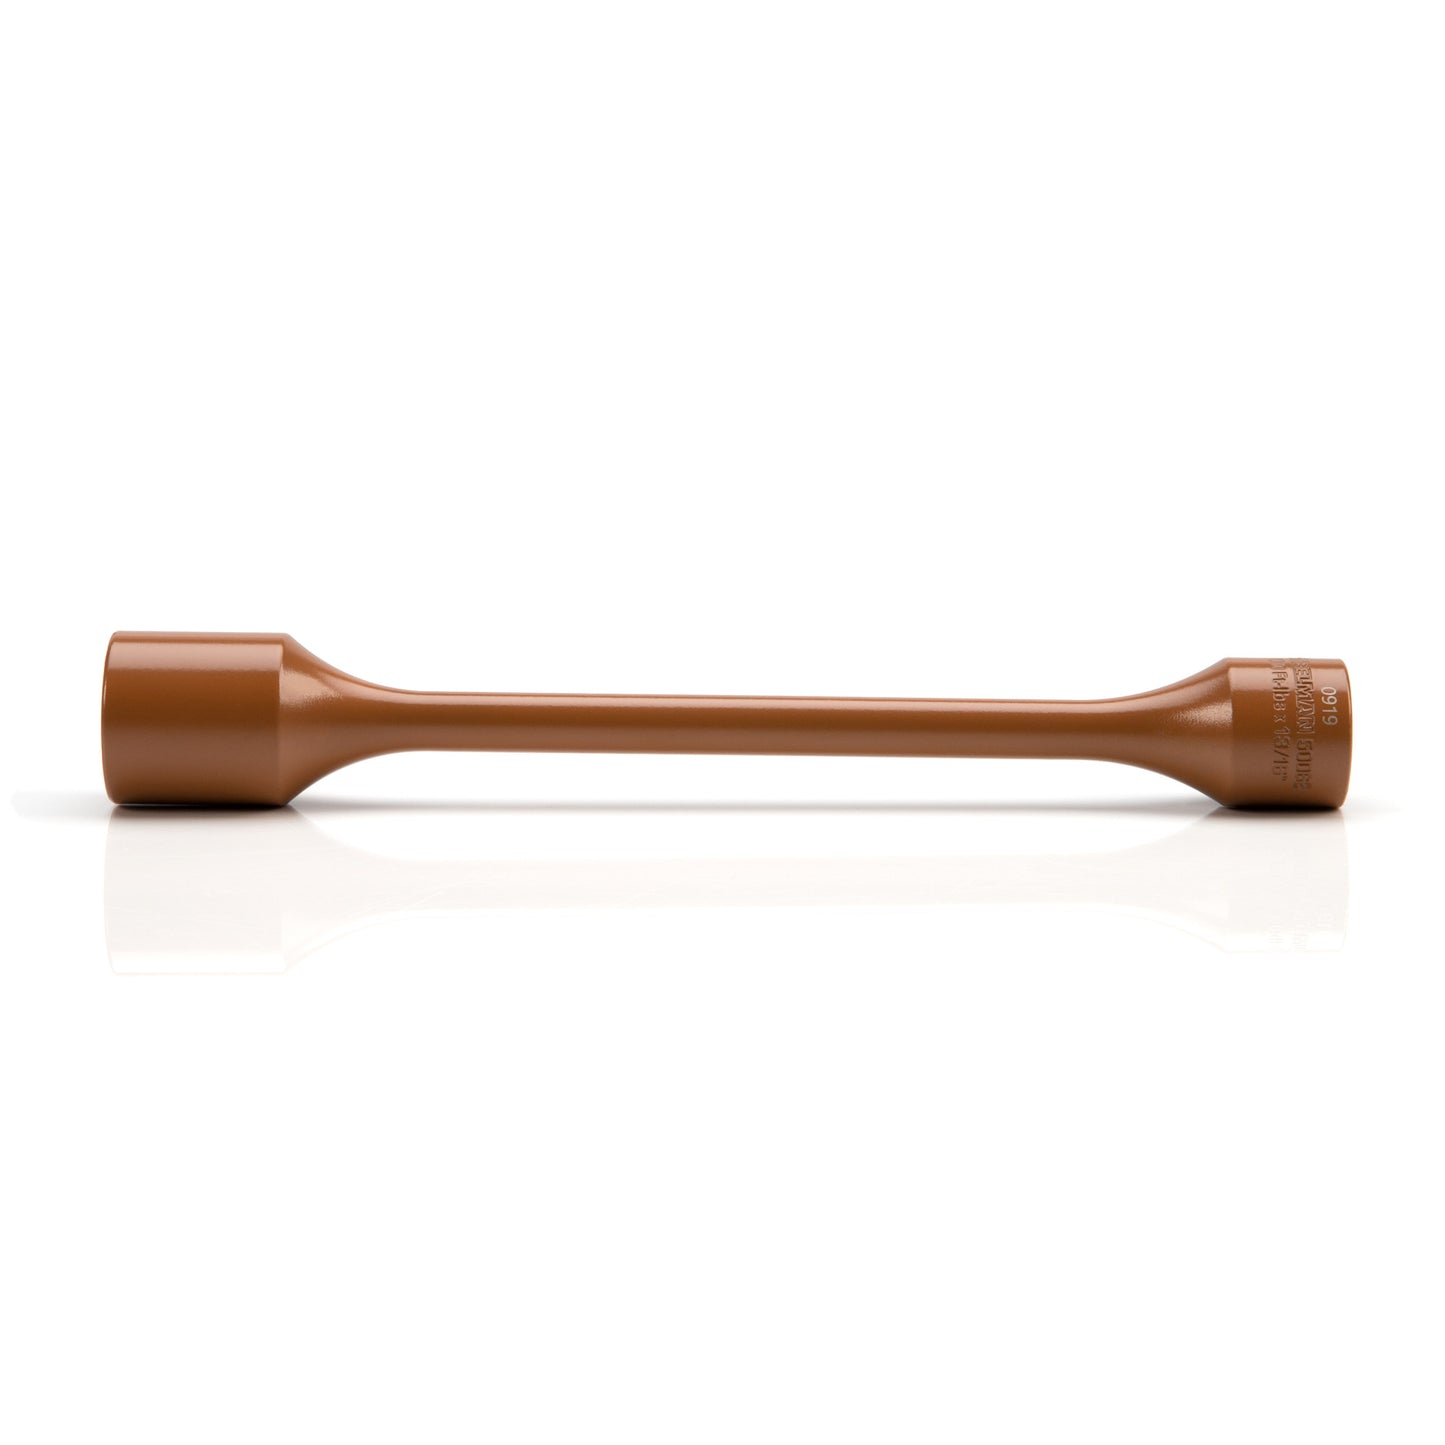 1/2-inch Drive x 13/16-Inch 100 ft-lb Torque Stick - Brown